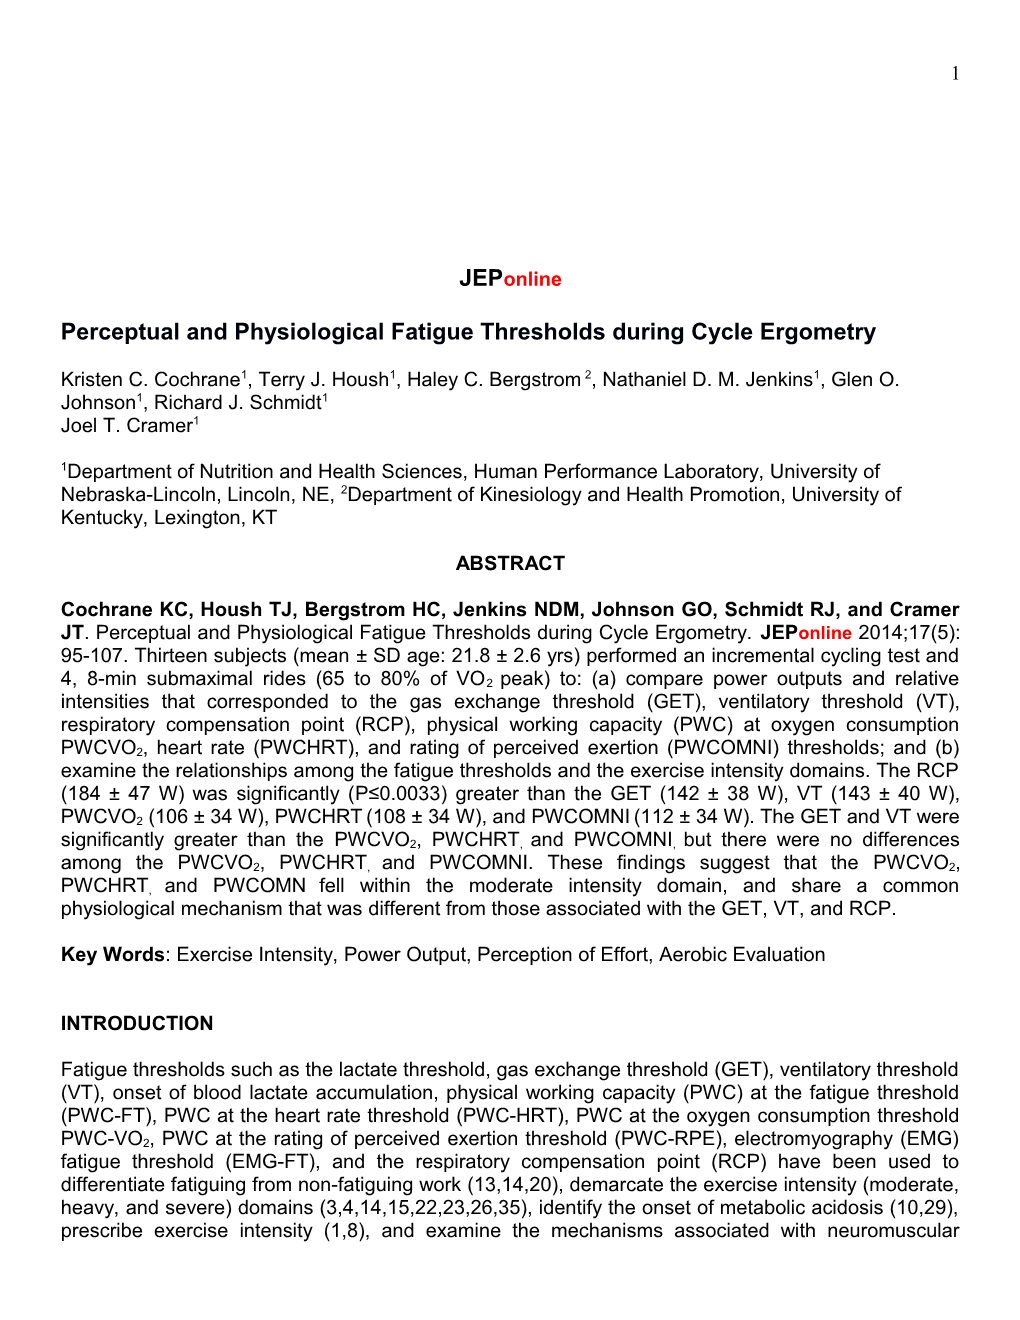 Perceptual and Physiological Fatigue Thresholds During Cycle Ergometry